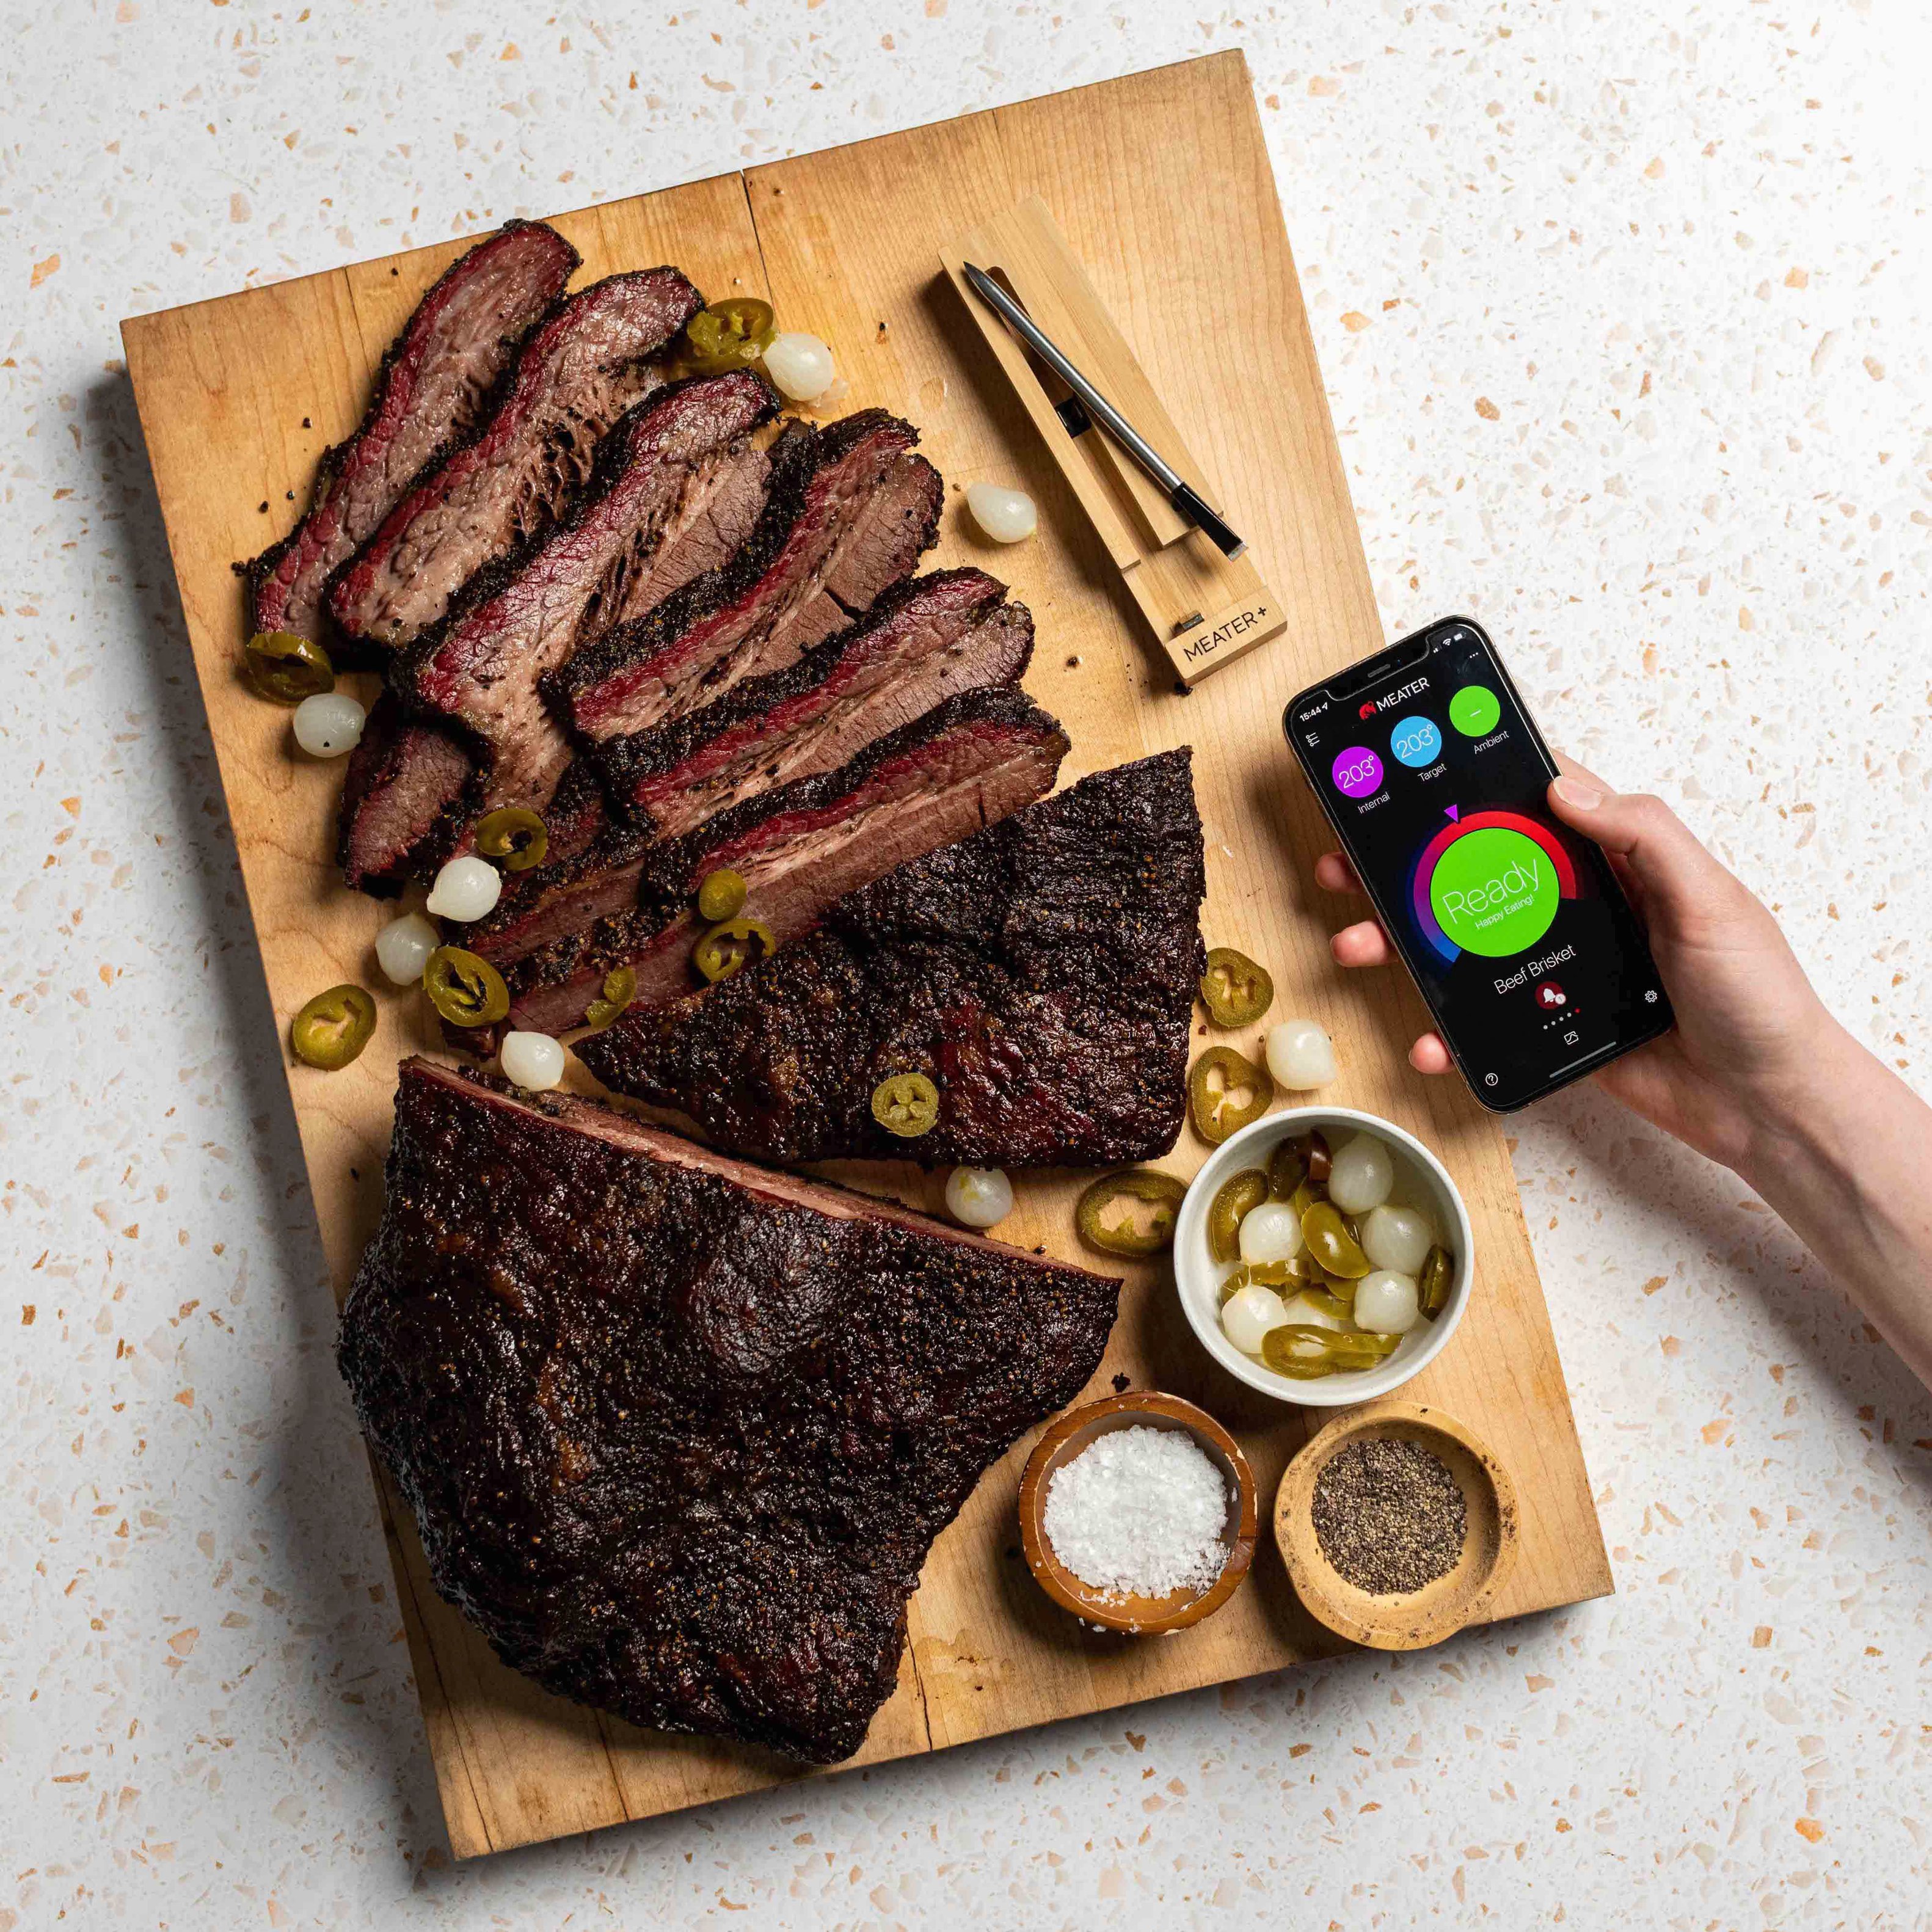 Traeger Grills About To Get Even Better With MEATER Acquisition